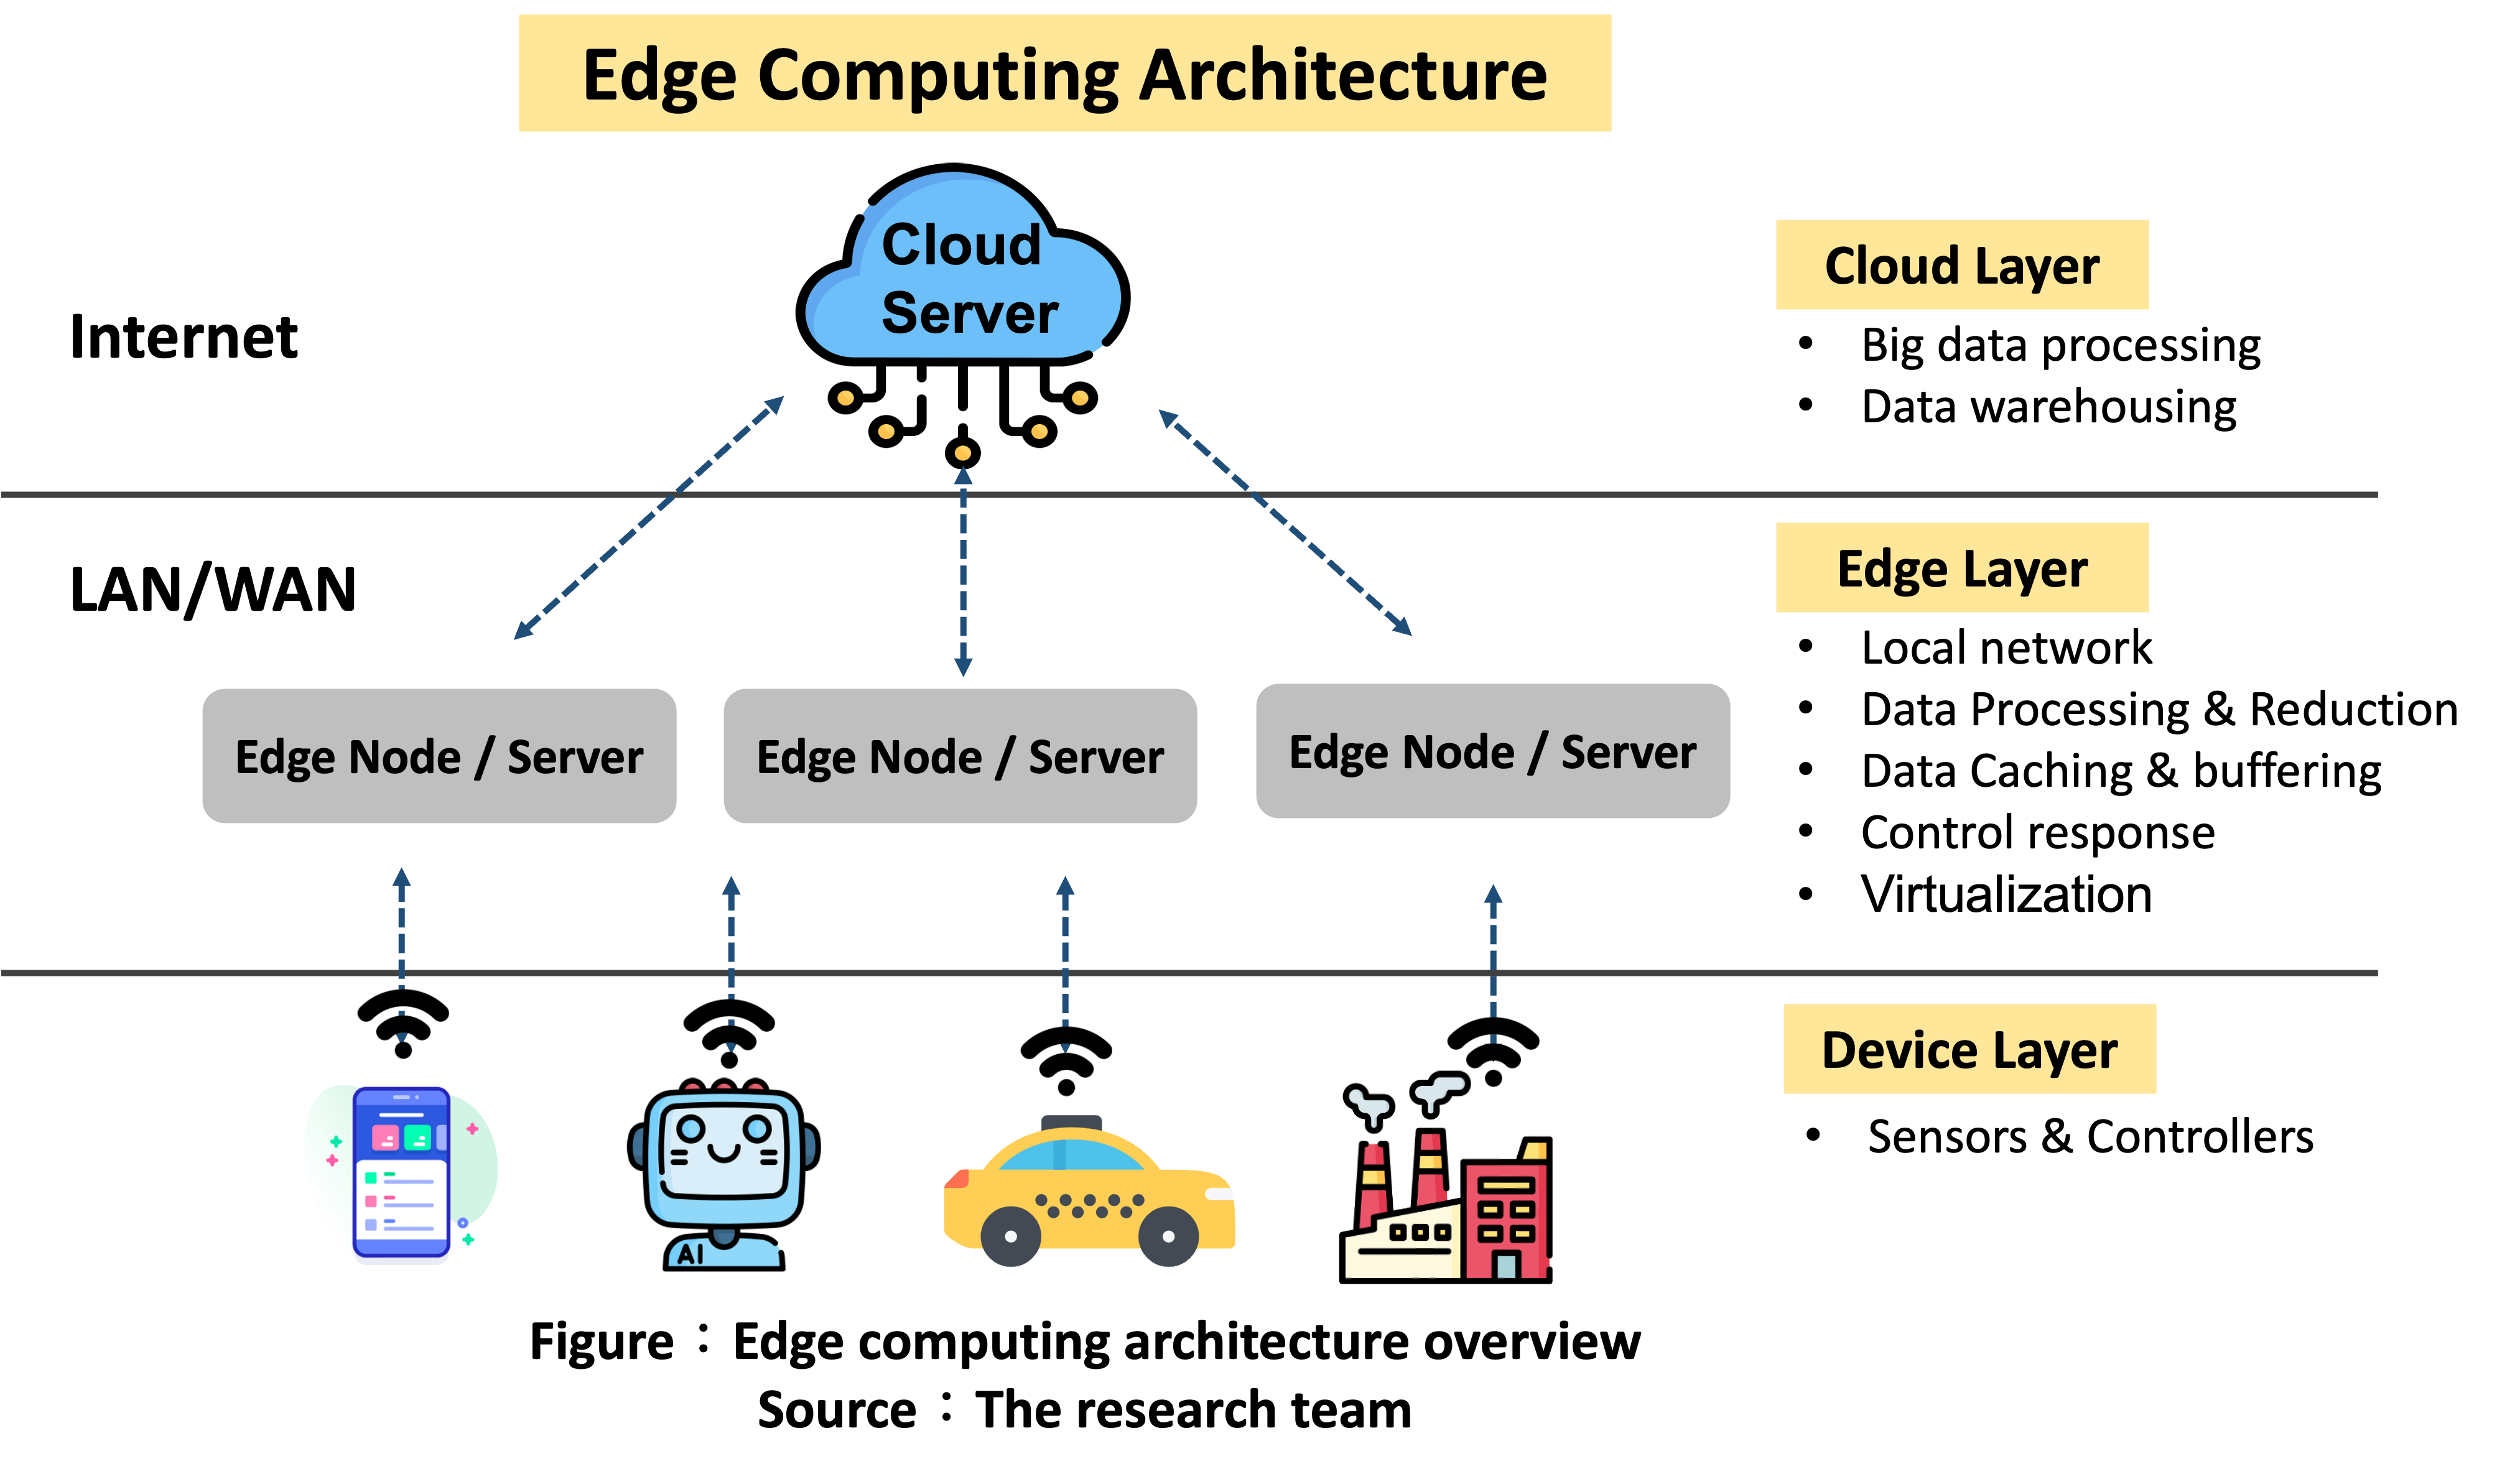 Edge Computing Architecture Overview 边缘运算架构示意图